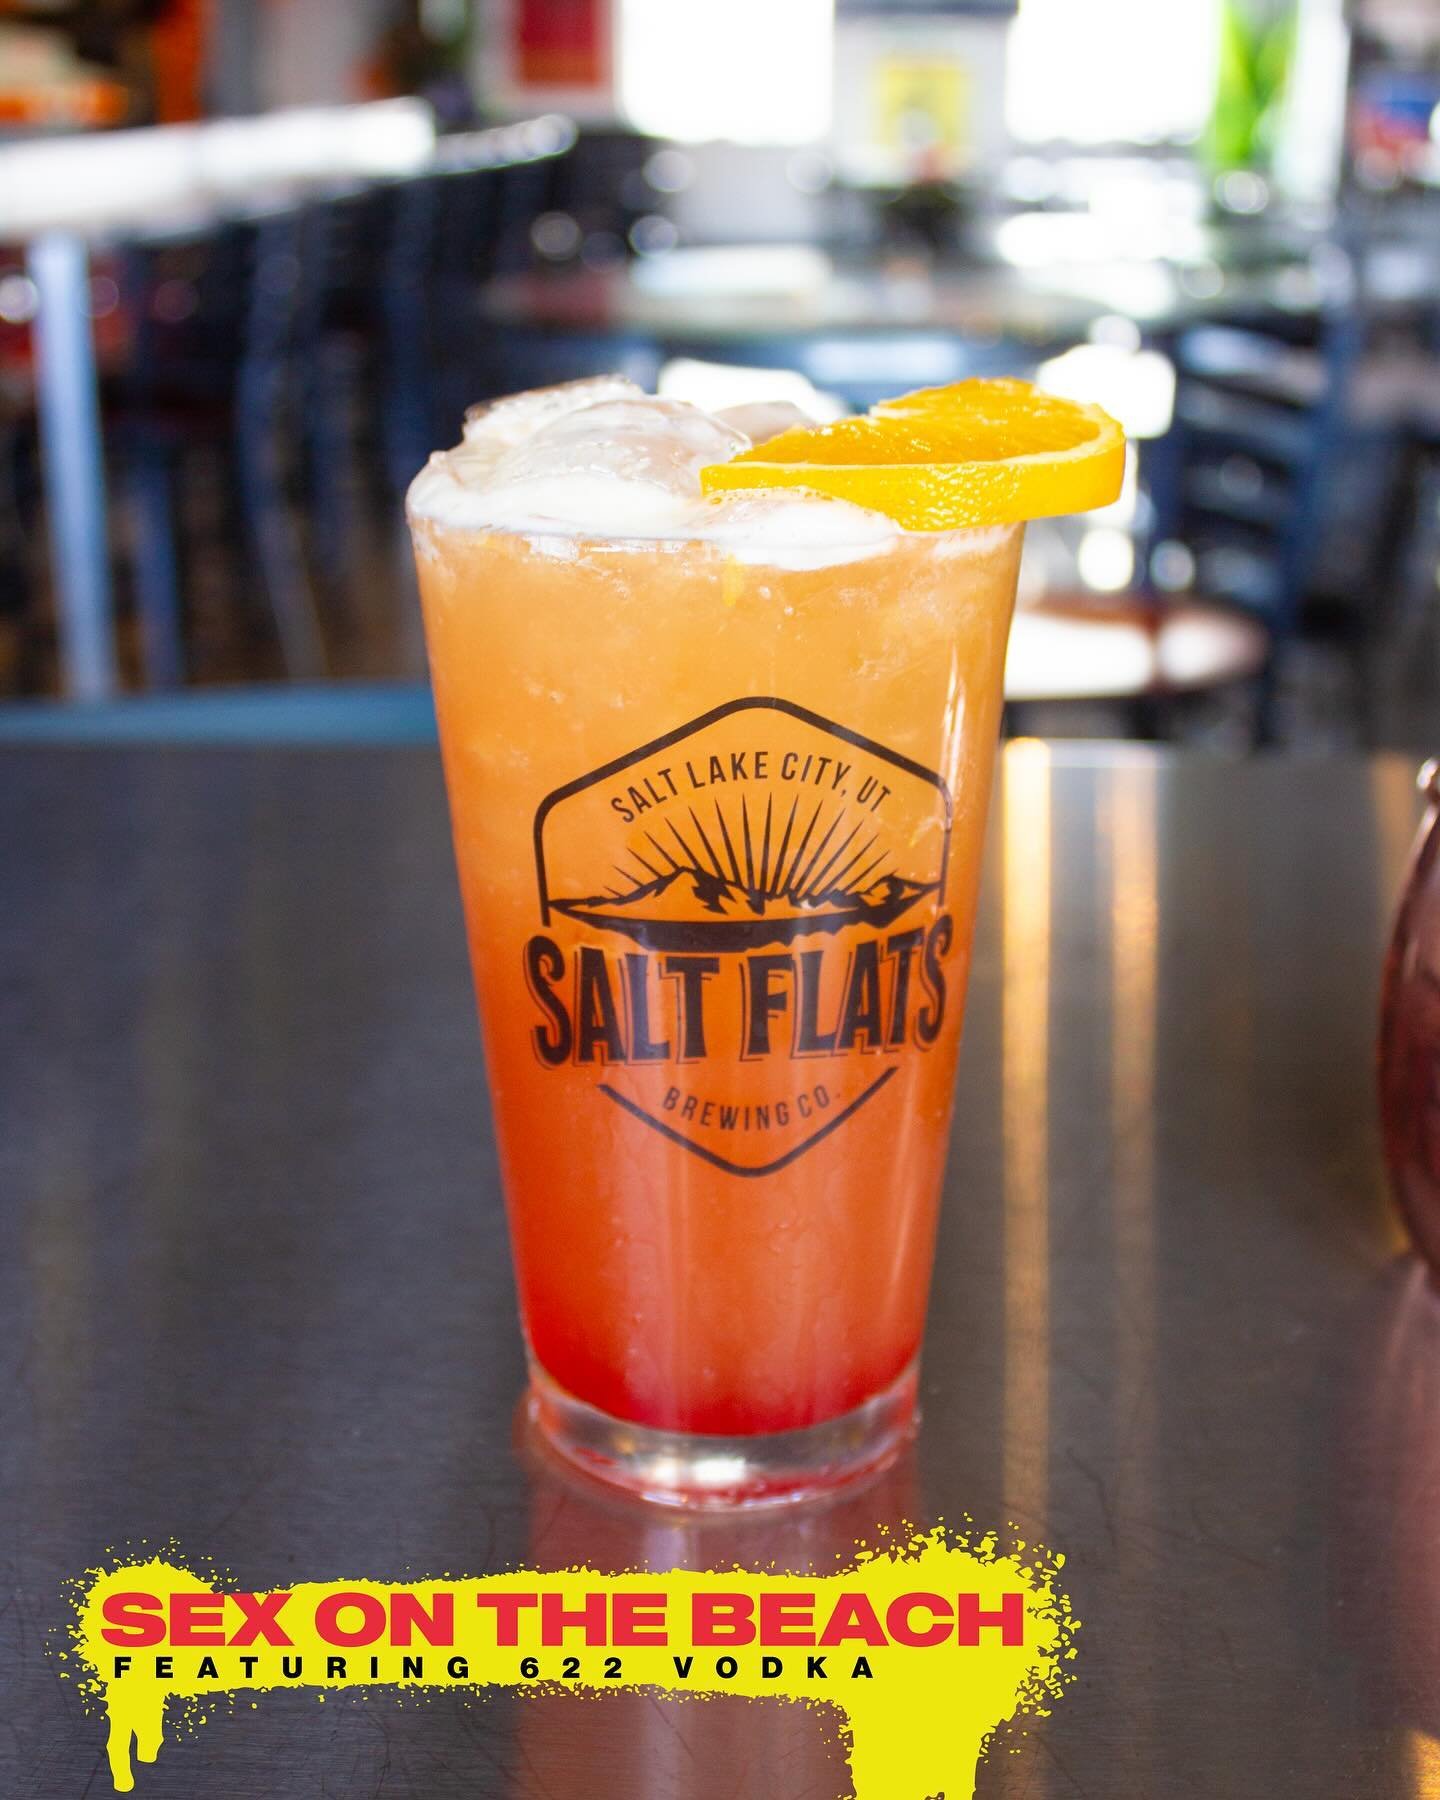 Quench your thirst this weekend with a tropical cocktail that makes you feel like you&rsquo;re at the beach no matter where you are 🏝️
.
.
.
.
.
.
#saltflatsspirits #saltflatsdistillery #yum 
#saltflatsdistilling #drinksaltflats #slc #distillery #co